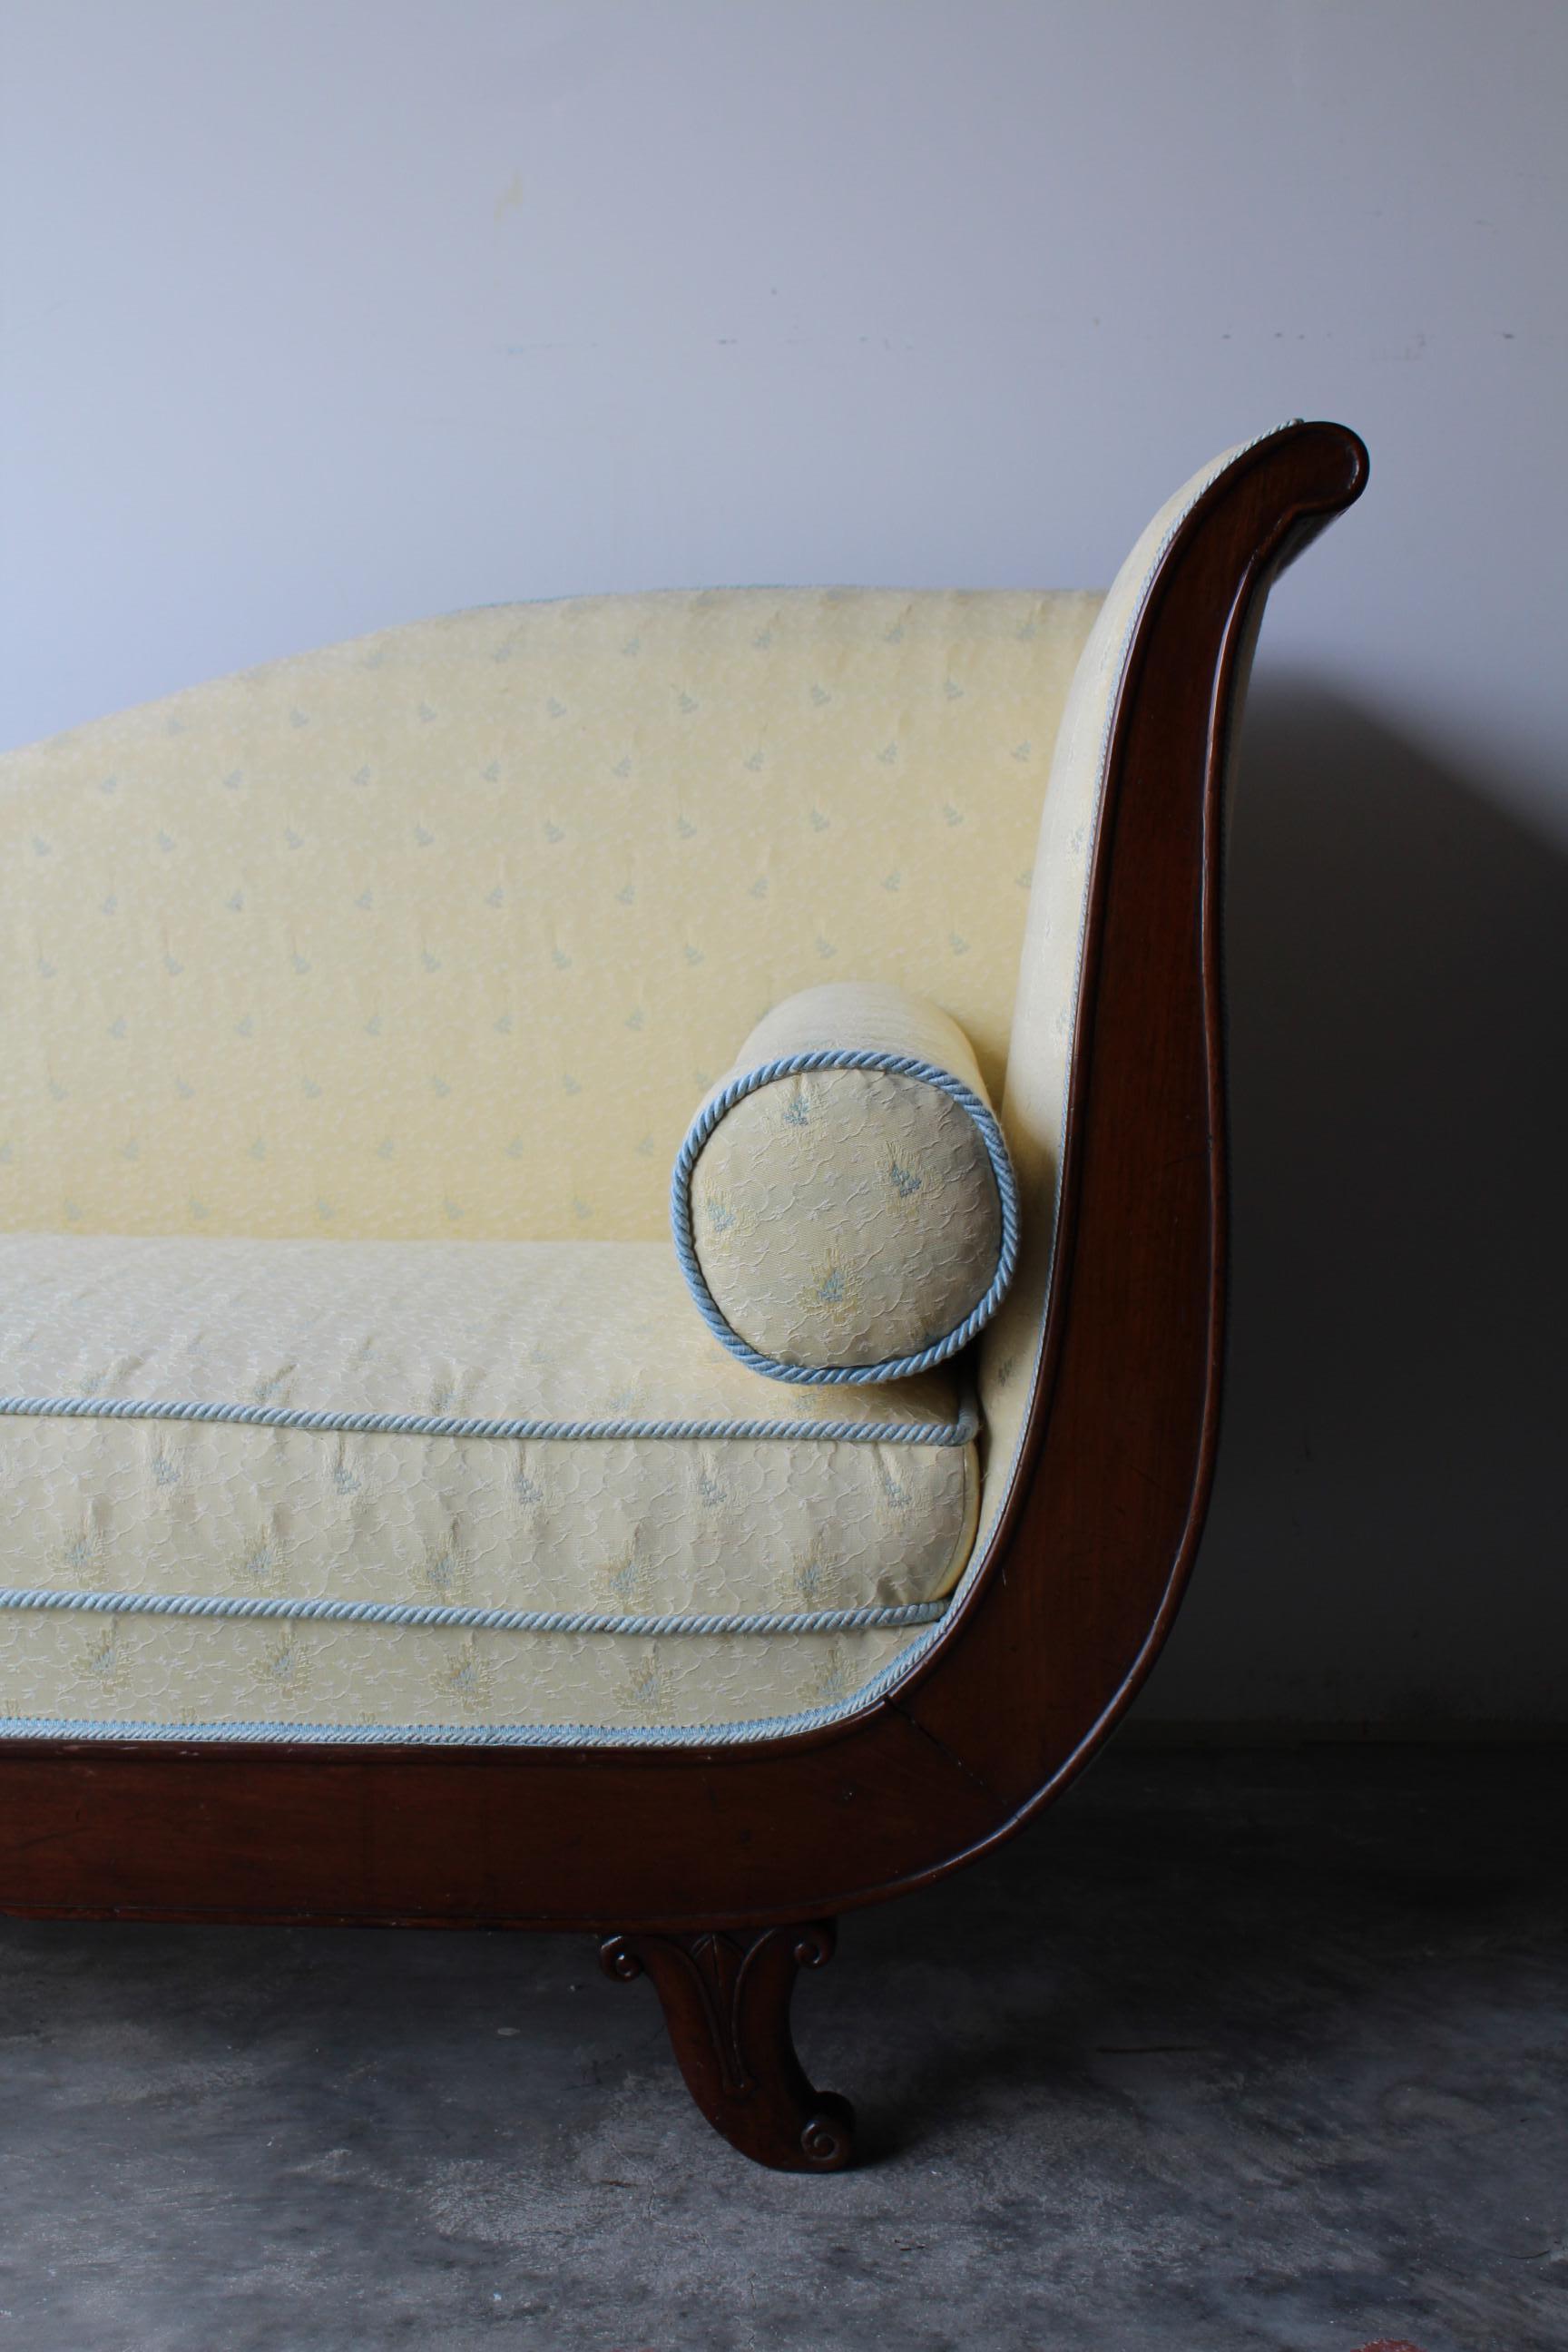 Very elegant rest bed (Recamier in French) made at the end of Empire with a mahogany frame resting on four short feet. Recently entirely reupholstered (in Paris) with all sides and seat covered with a Pierre Frey fabric in pale yellow spotted with